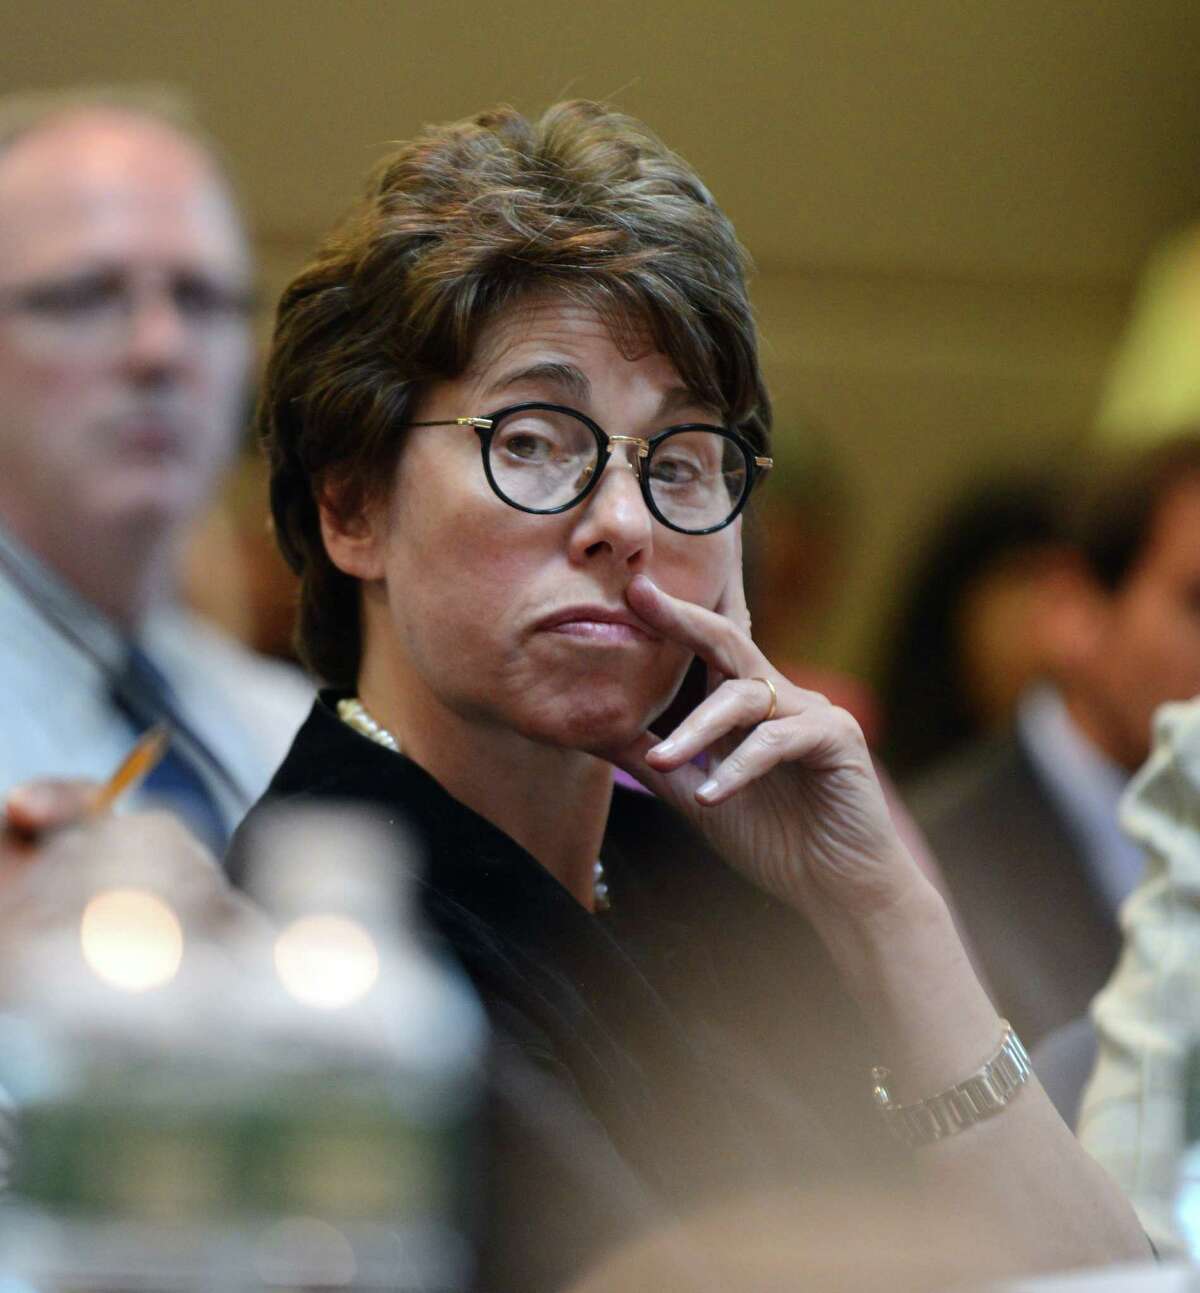 Regents Chancellor Merryl Tisch listens to comments during a Board of Regents meeting Monday afternoon, June 15, 2015, at the State Education Building in Albany, N.Y. (Will Waldron/Times Union)